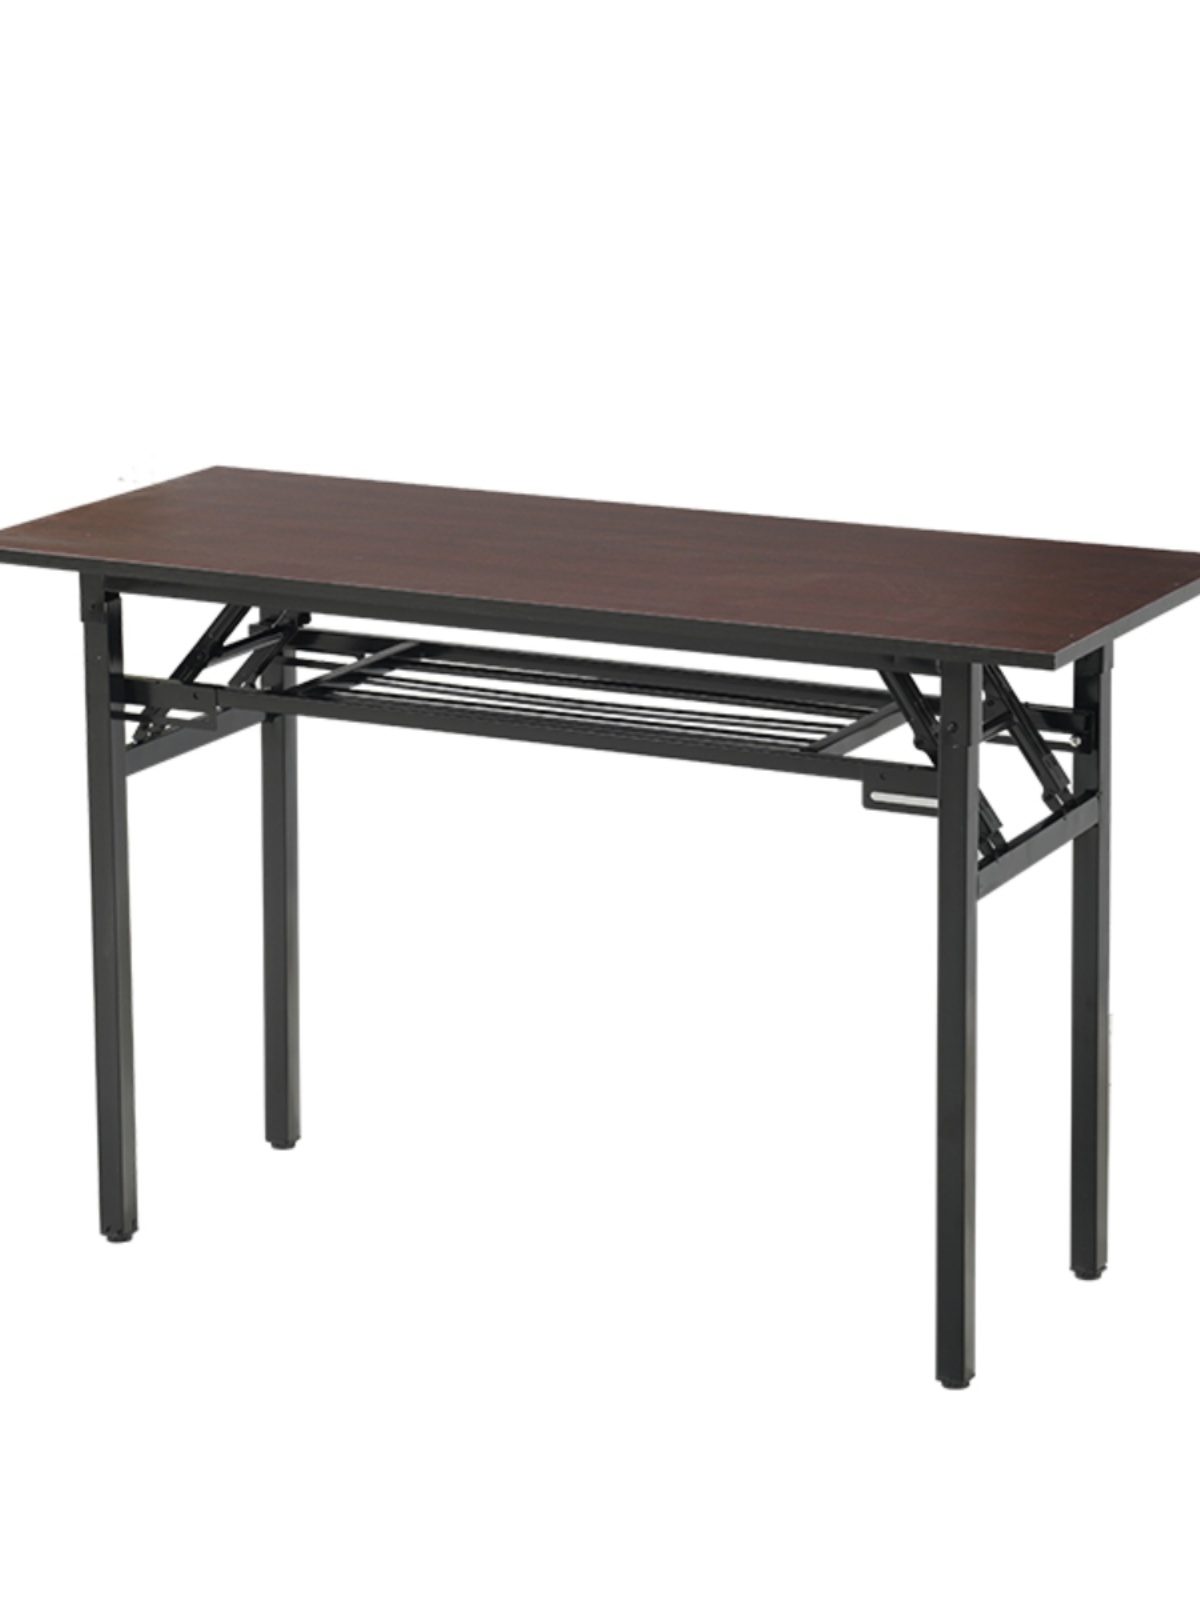 Simple folding tables, rectangular training tables, stall tables, outdoor study desks, conference bench tables, dining tables, desks